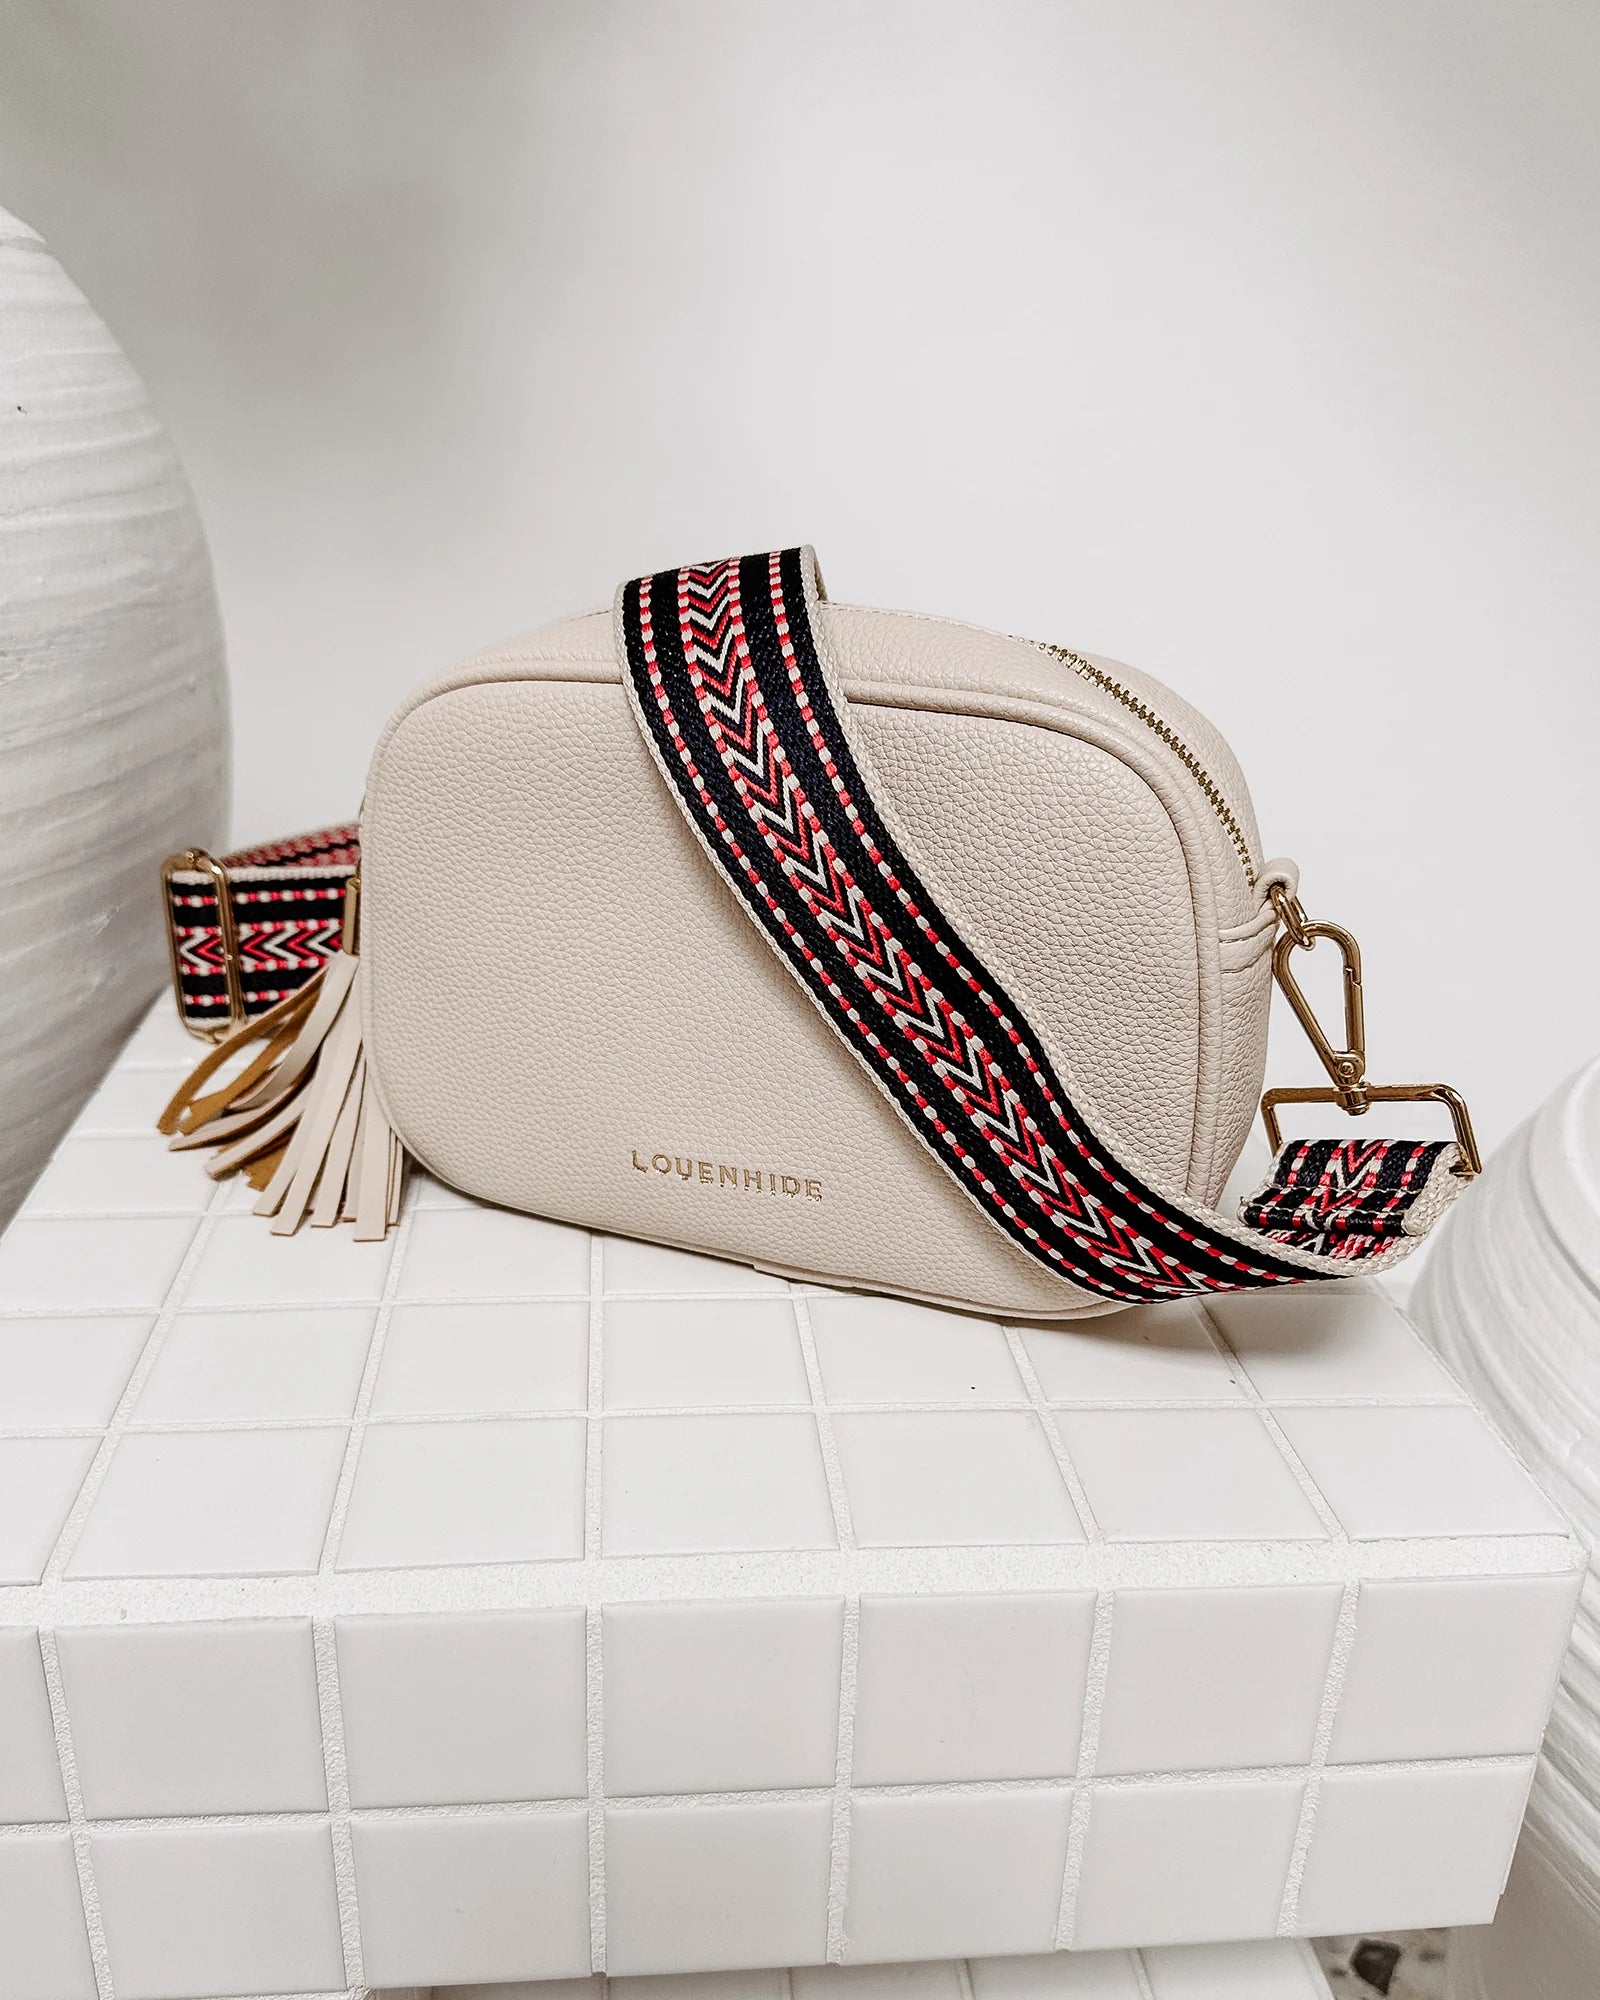 The Louenhide Jacinta Crossbody Bag is the ultimate cool-girl bag, featuring a complimentary detachable guitar strap.